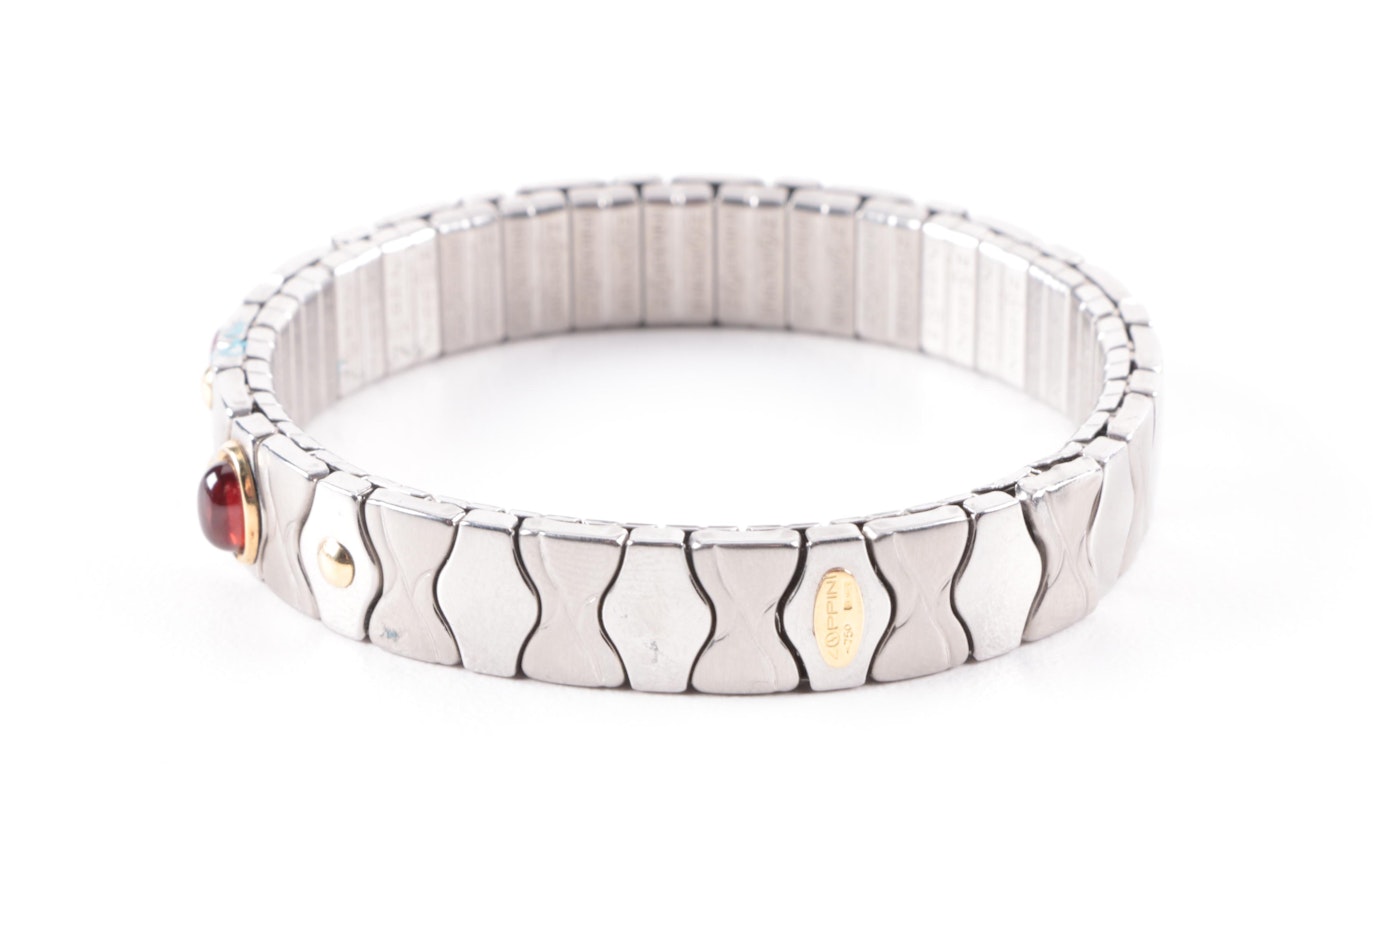 Zoppini Stainless Steel and 18K Gold Expansion Bracelets With Gemstones ...